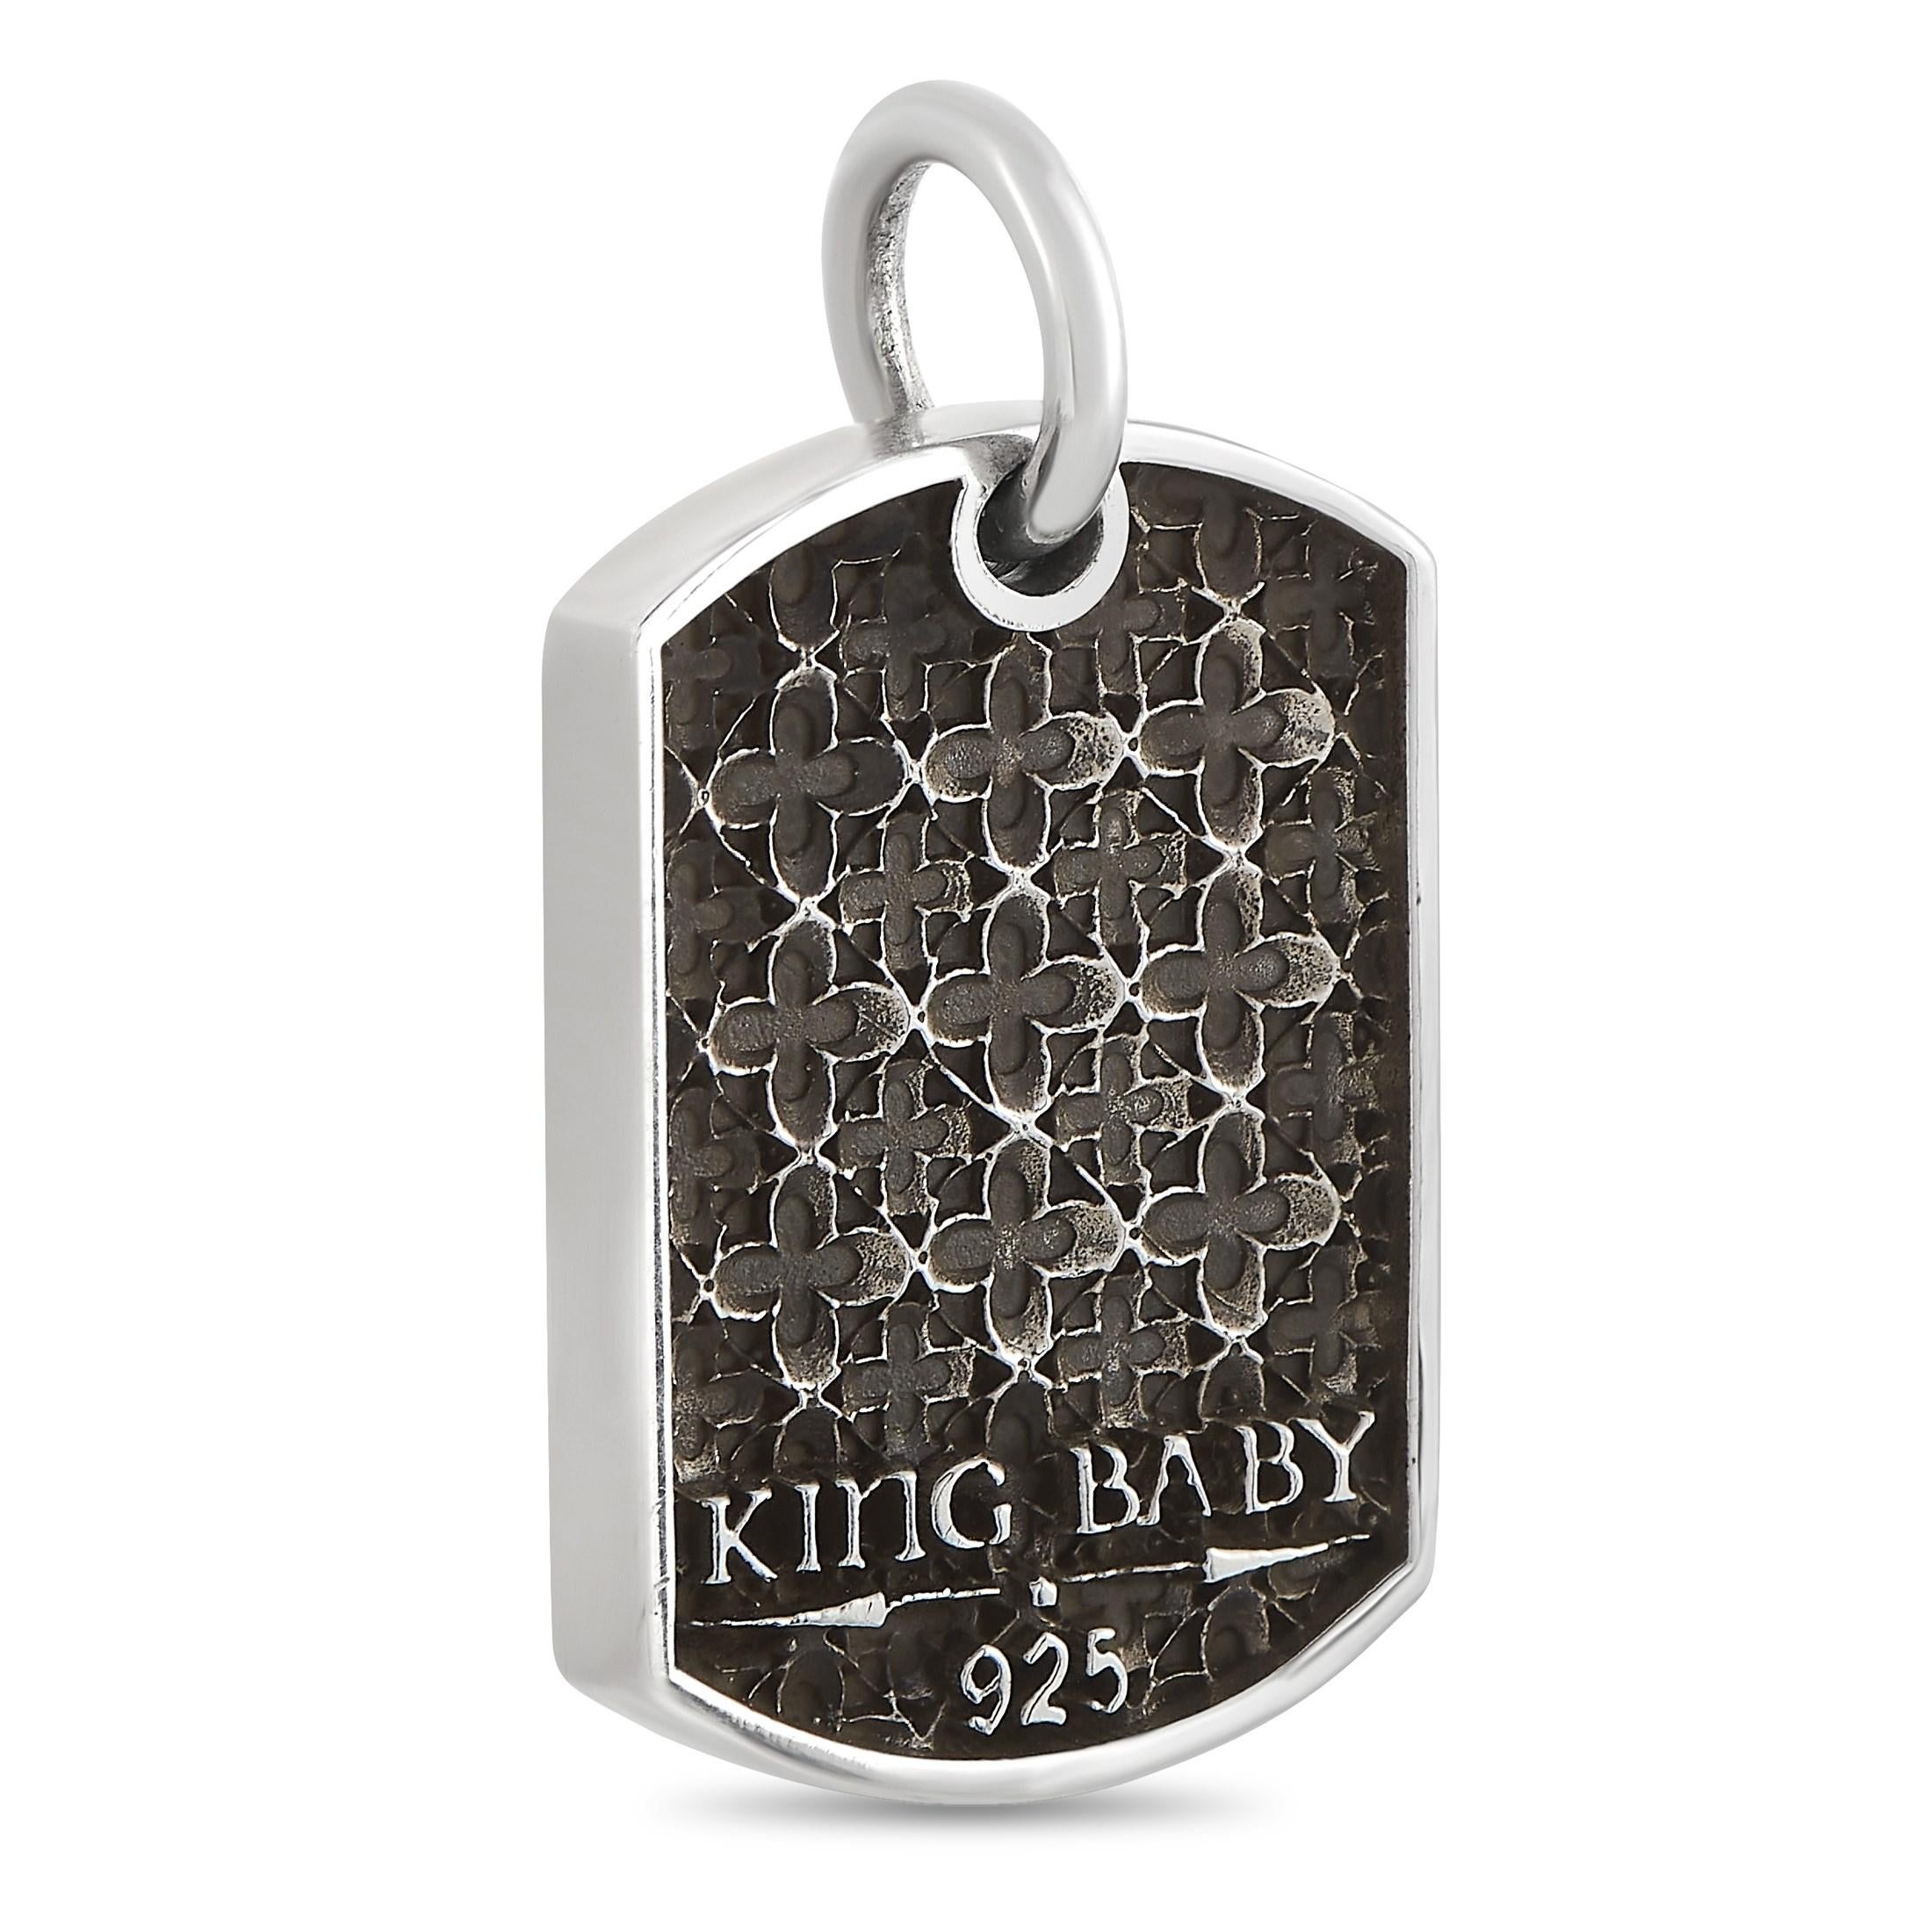 This King Baby dog tag pendant is made of silver and embellished with black diamonds. The pendant measures 1.5” in length and 1” in width.

Offered in brand-new condition, this item includes the manufacturer’s box.